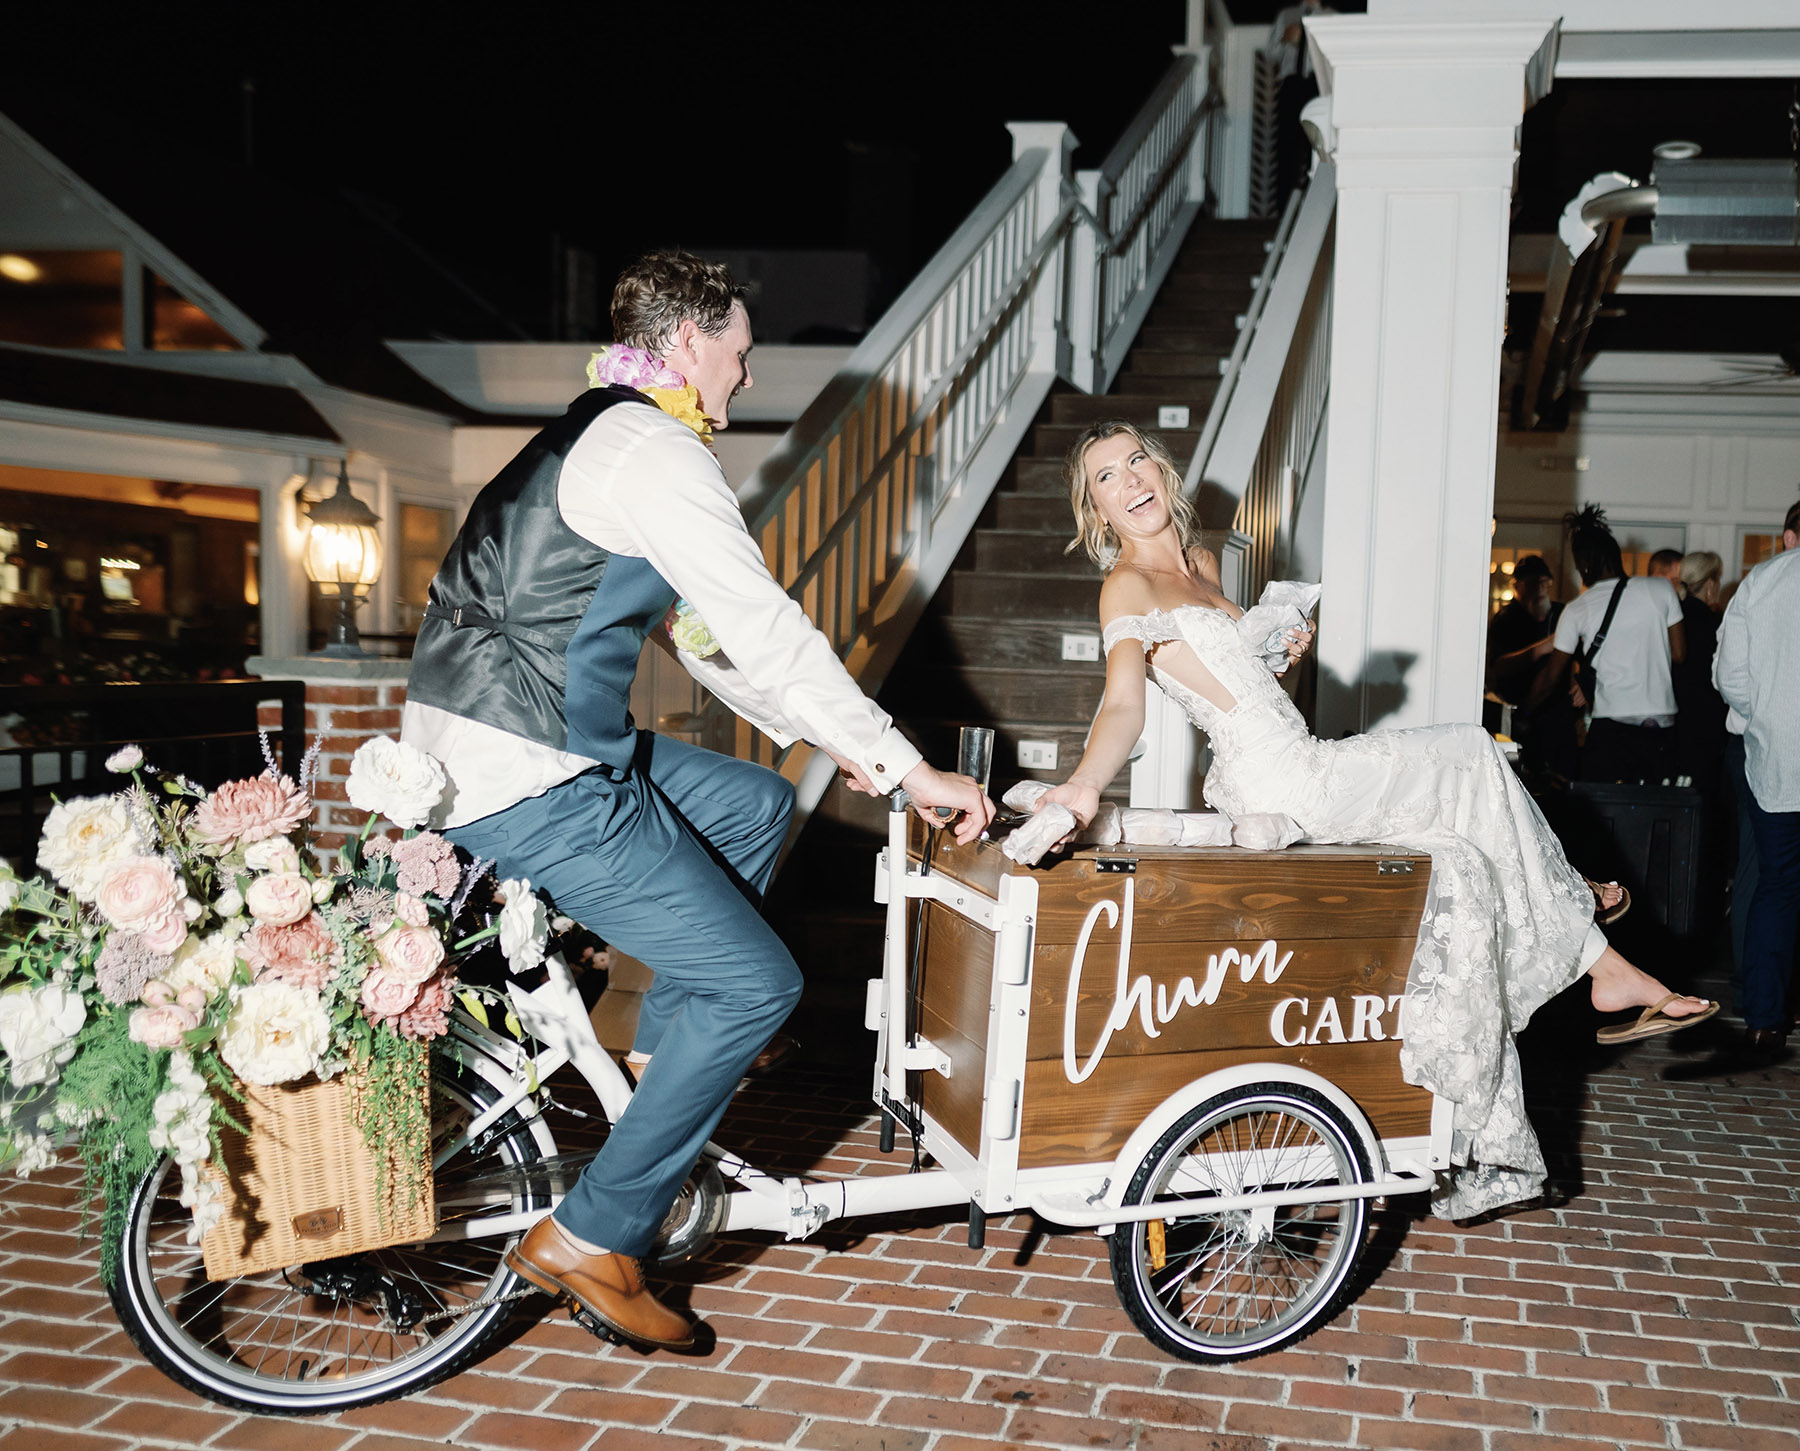 The Churn Cart offers handmade, pre-packaged, cereal-infused ice cream sandwiches that are a hit at bridal showers and weddings.